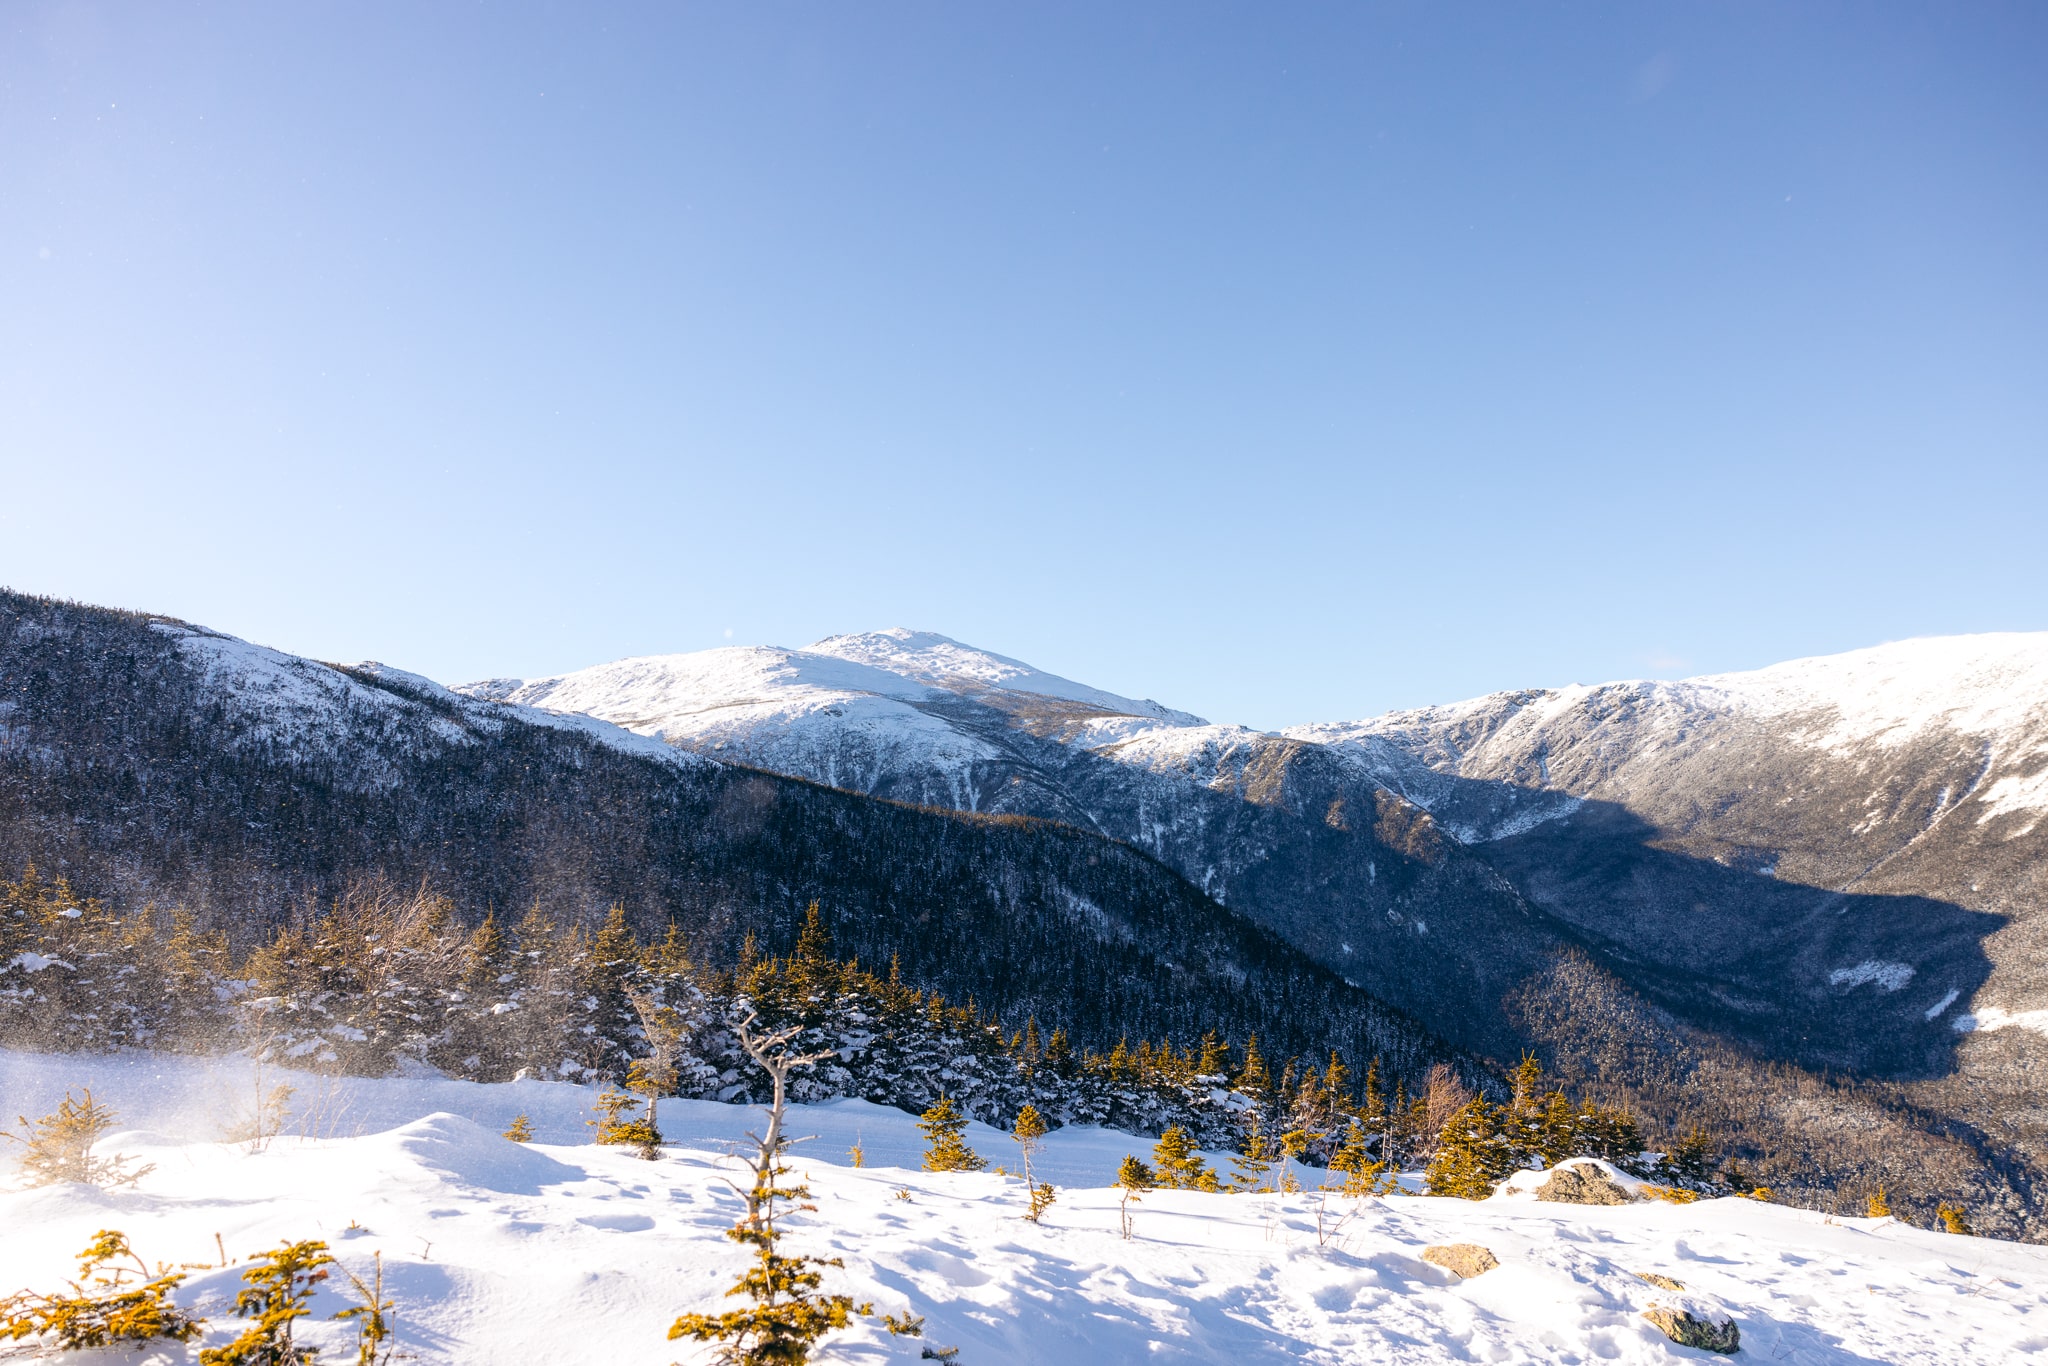 View of snowy mountains in the White Mountains